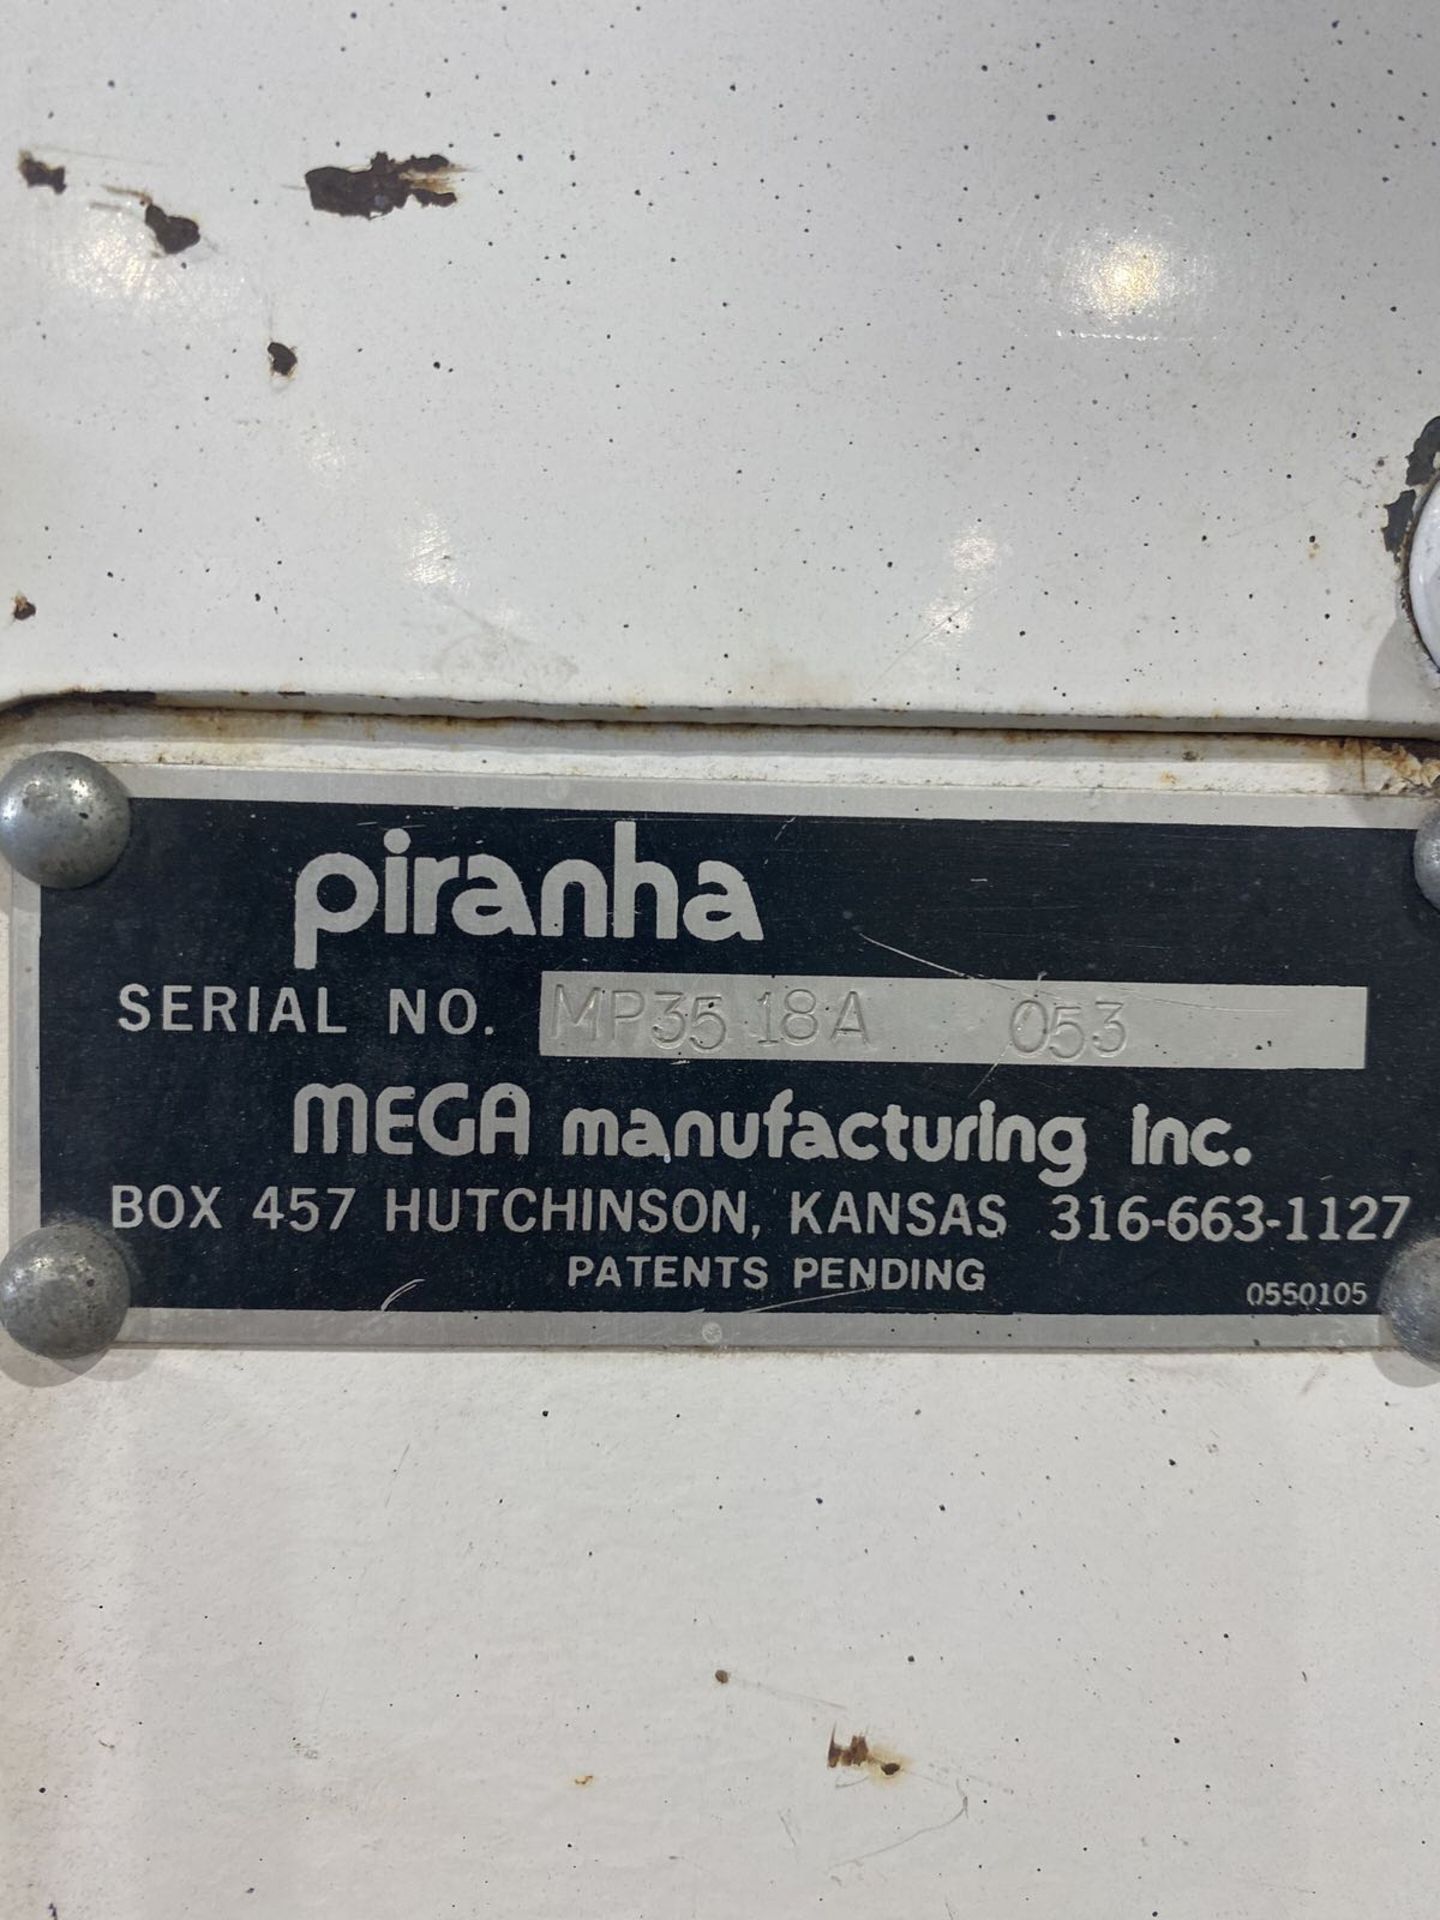 PIRANHA MEGAPUNCH STAMPING PRESS w/ ASSORTED TOOLING - Image 4 of 4